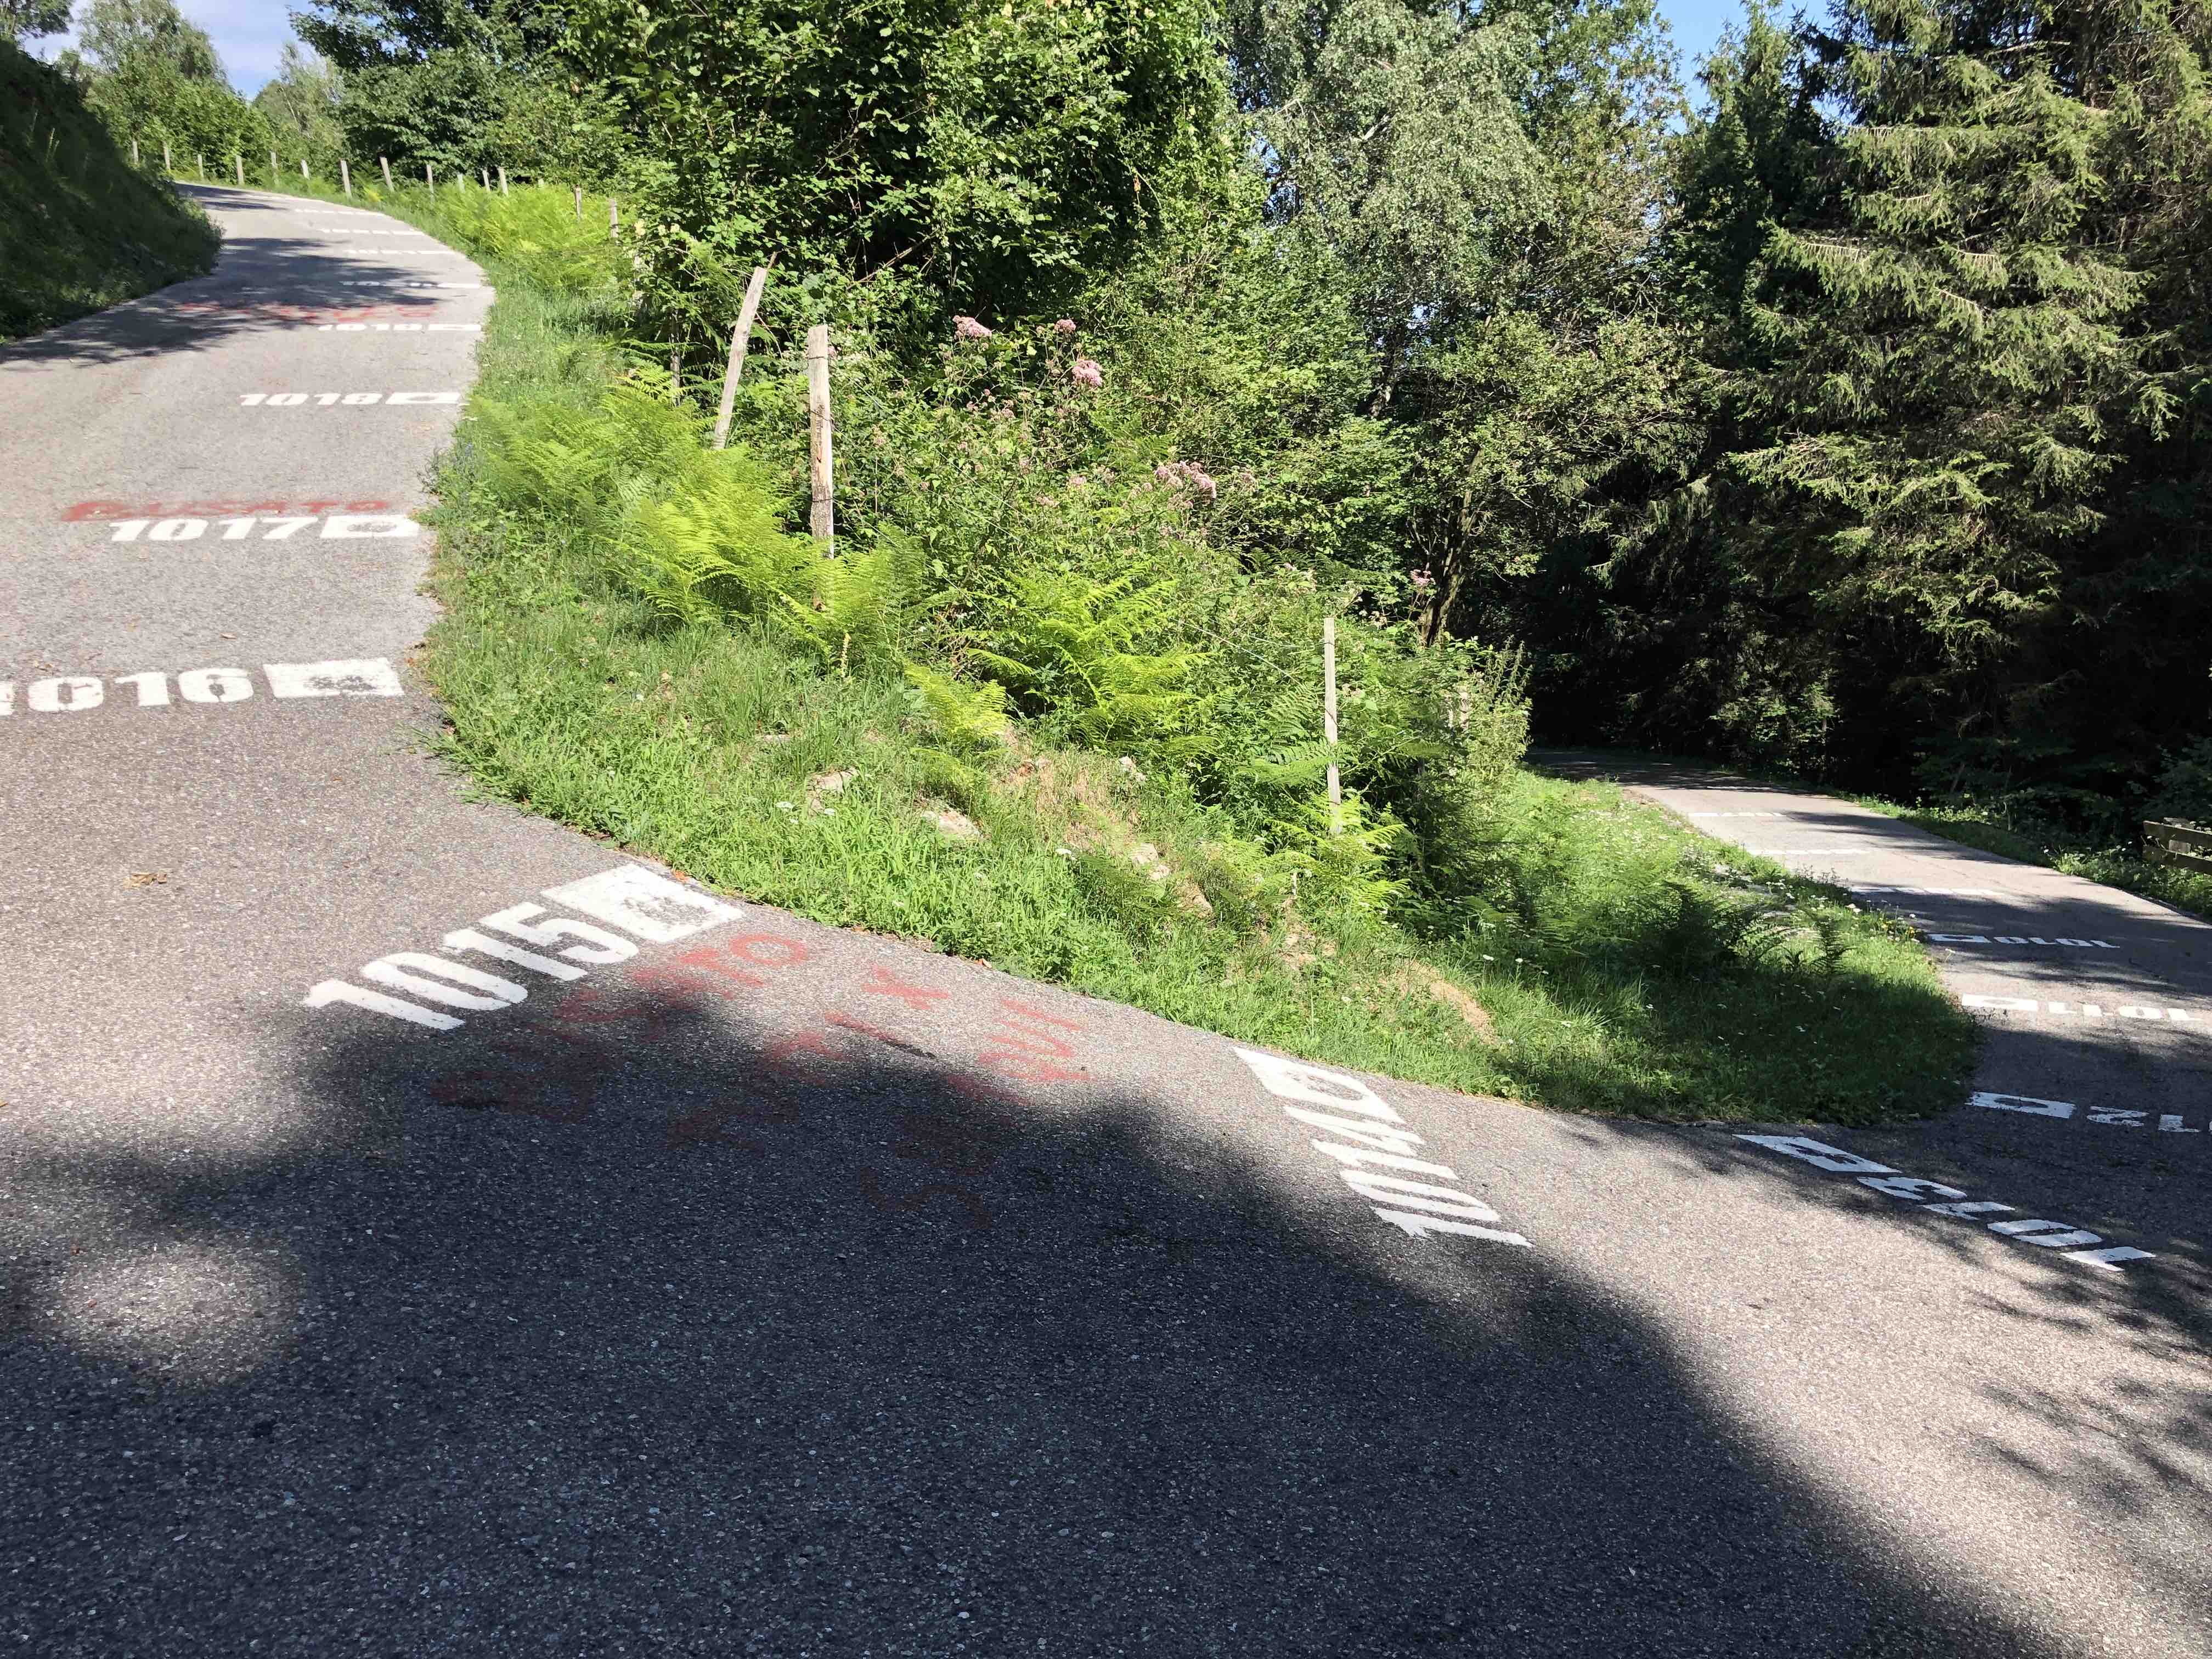 Painted numbers representing elevation in meters on the pavement of famous Muro di Sormano cycling climb